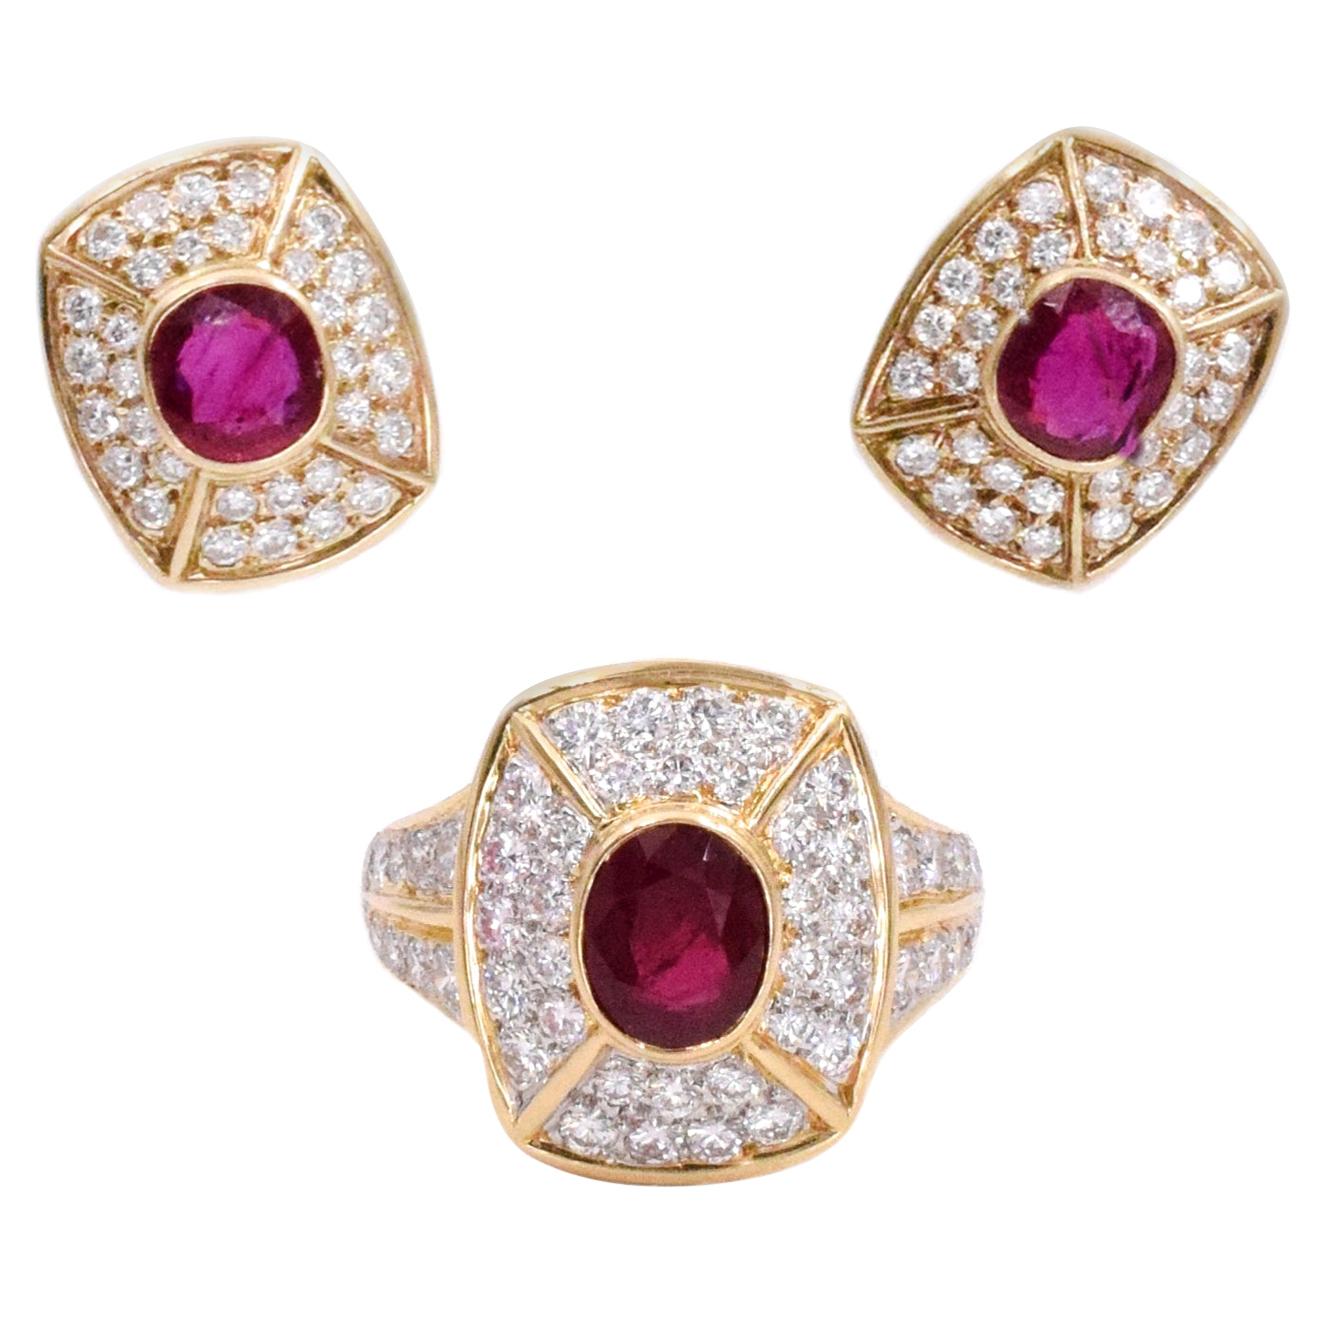 Cartier Ruby and Diamond Earrings and Ring Set